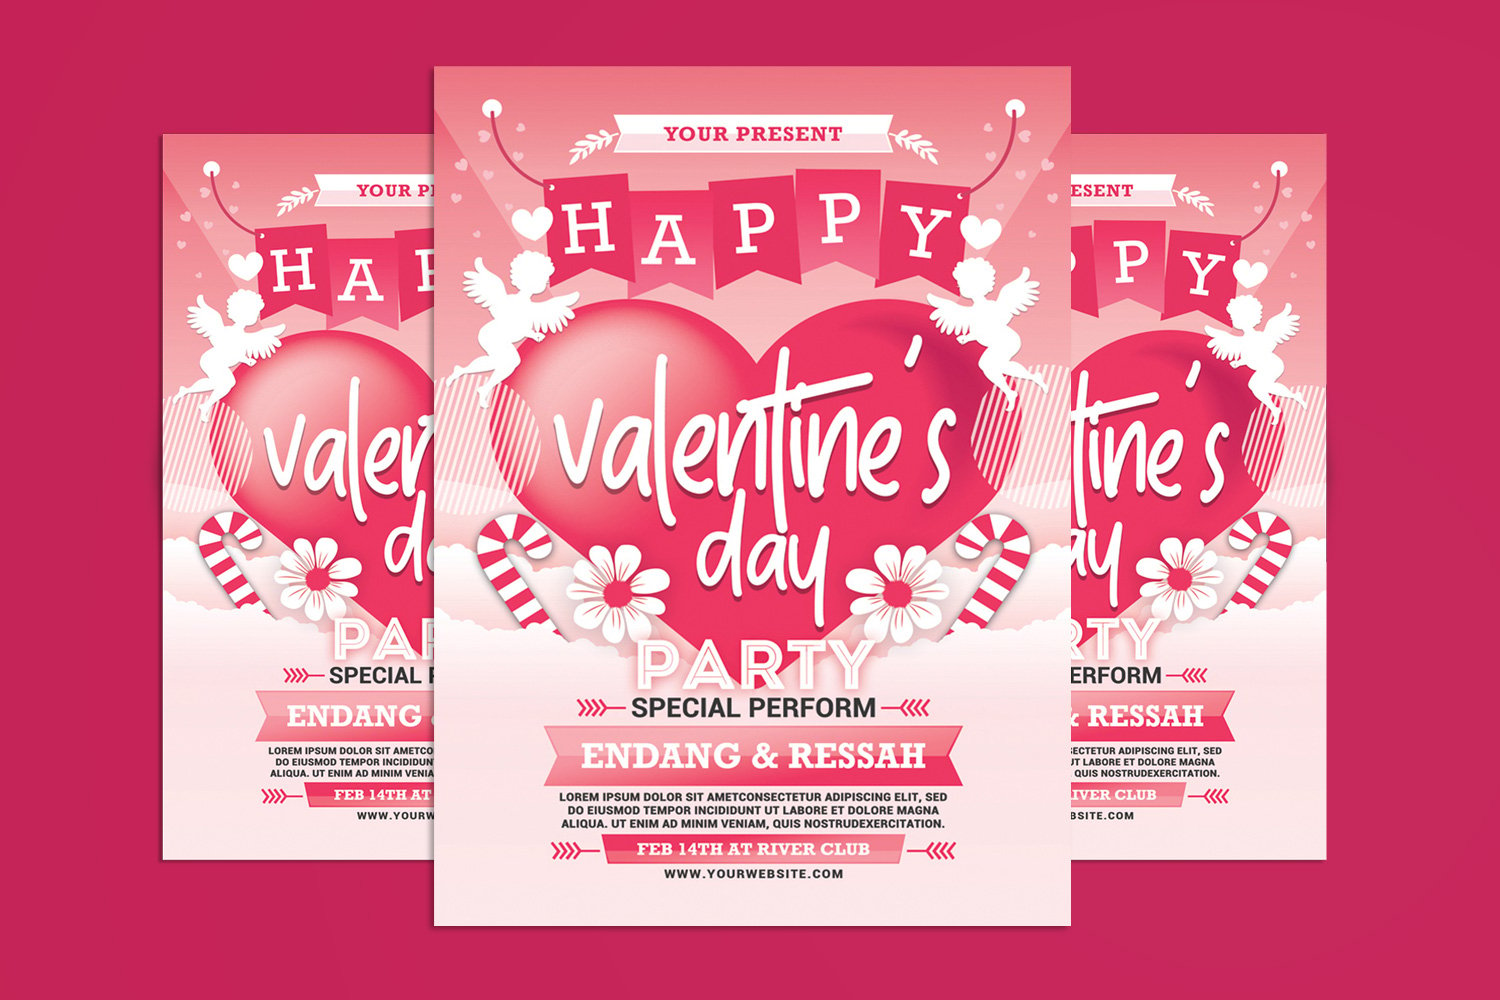 Template #312349 Dating Event Webdesign Template - Logo template Preview